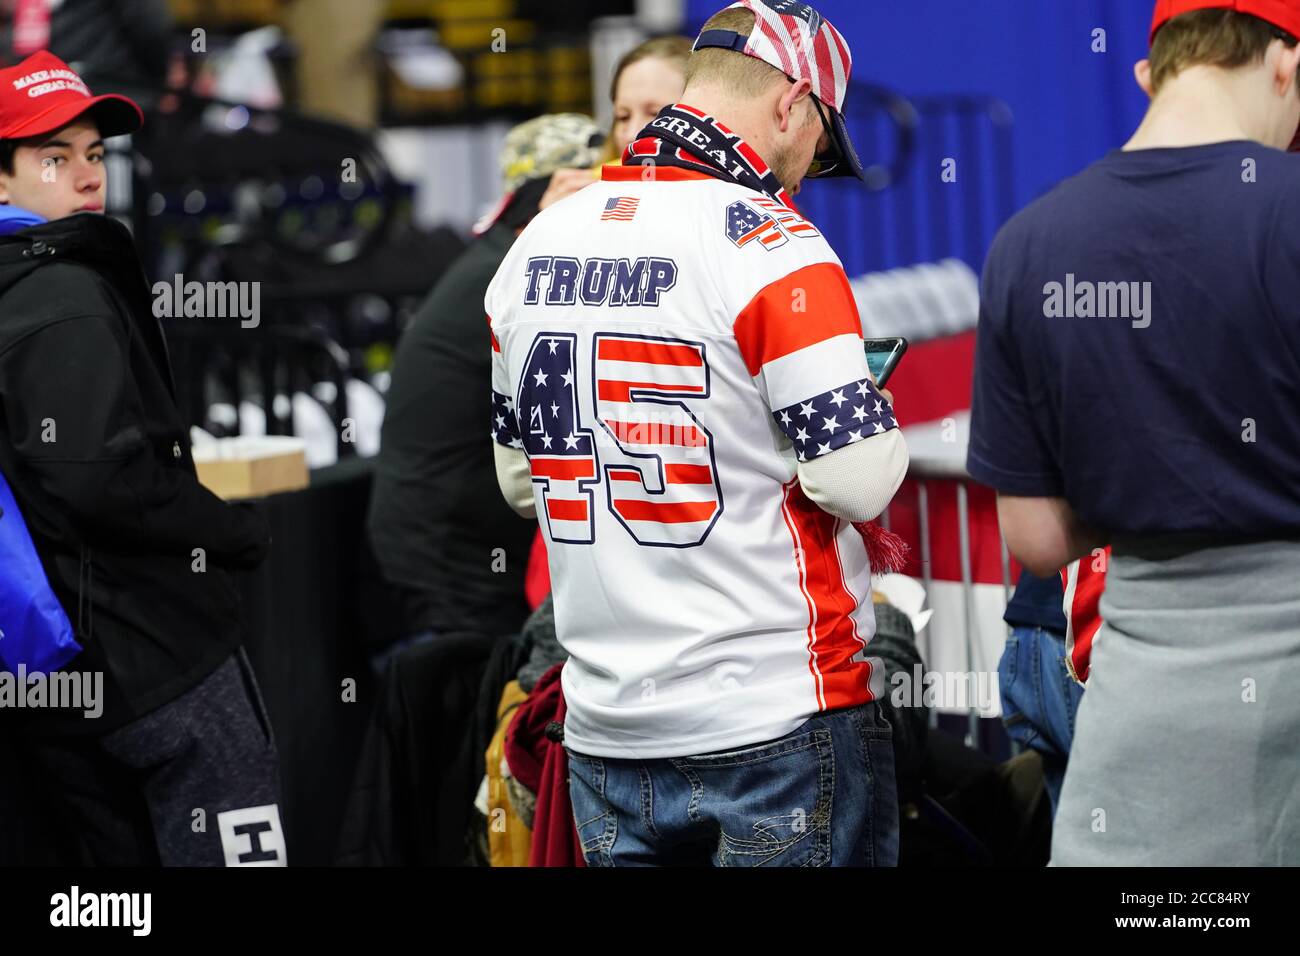 45th President Donald Trump supporters wear number 45 Jersey shirt to  support the President of USA at UW- Milwaukee Panther Arena. MAGA Rally  Stock Photo - Alamy